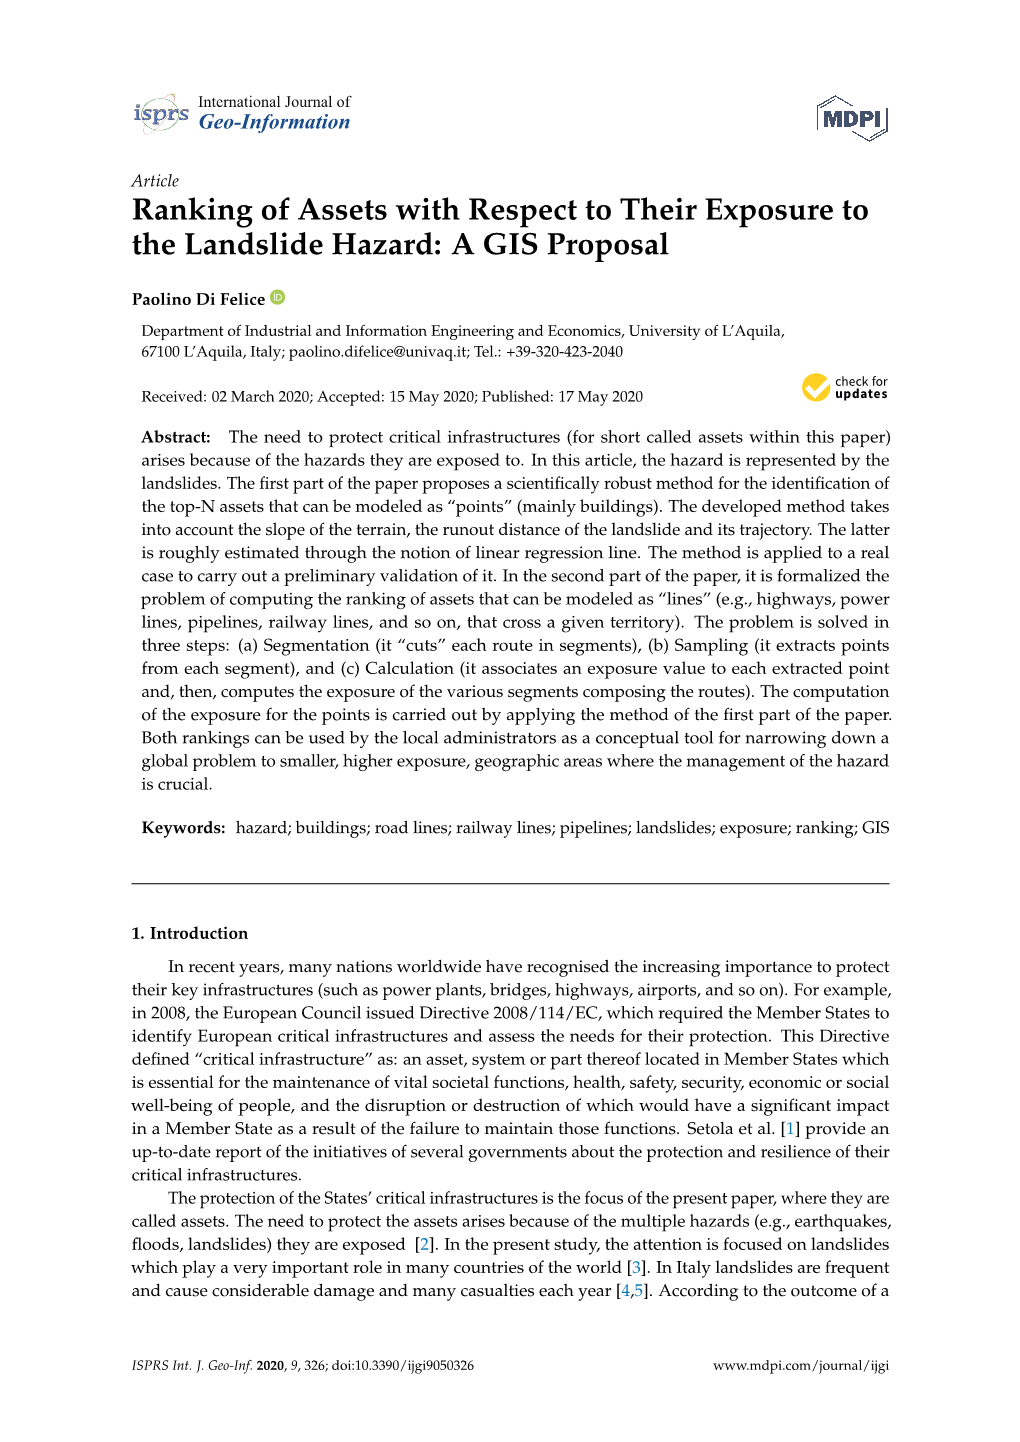 Ranking of Assets with Respect to Their Exposure to the Landslide Hazard: a GIS Proposal